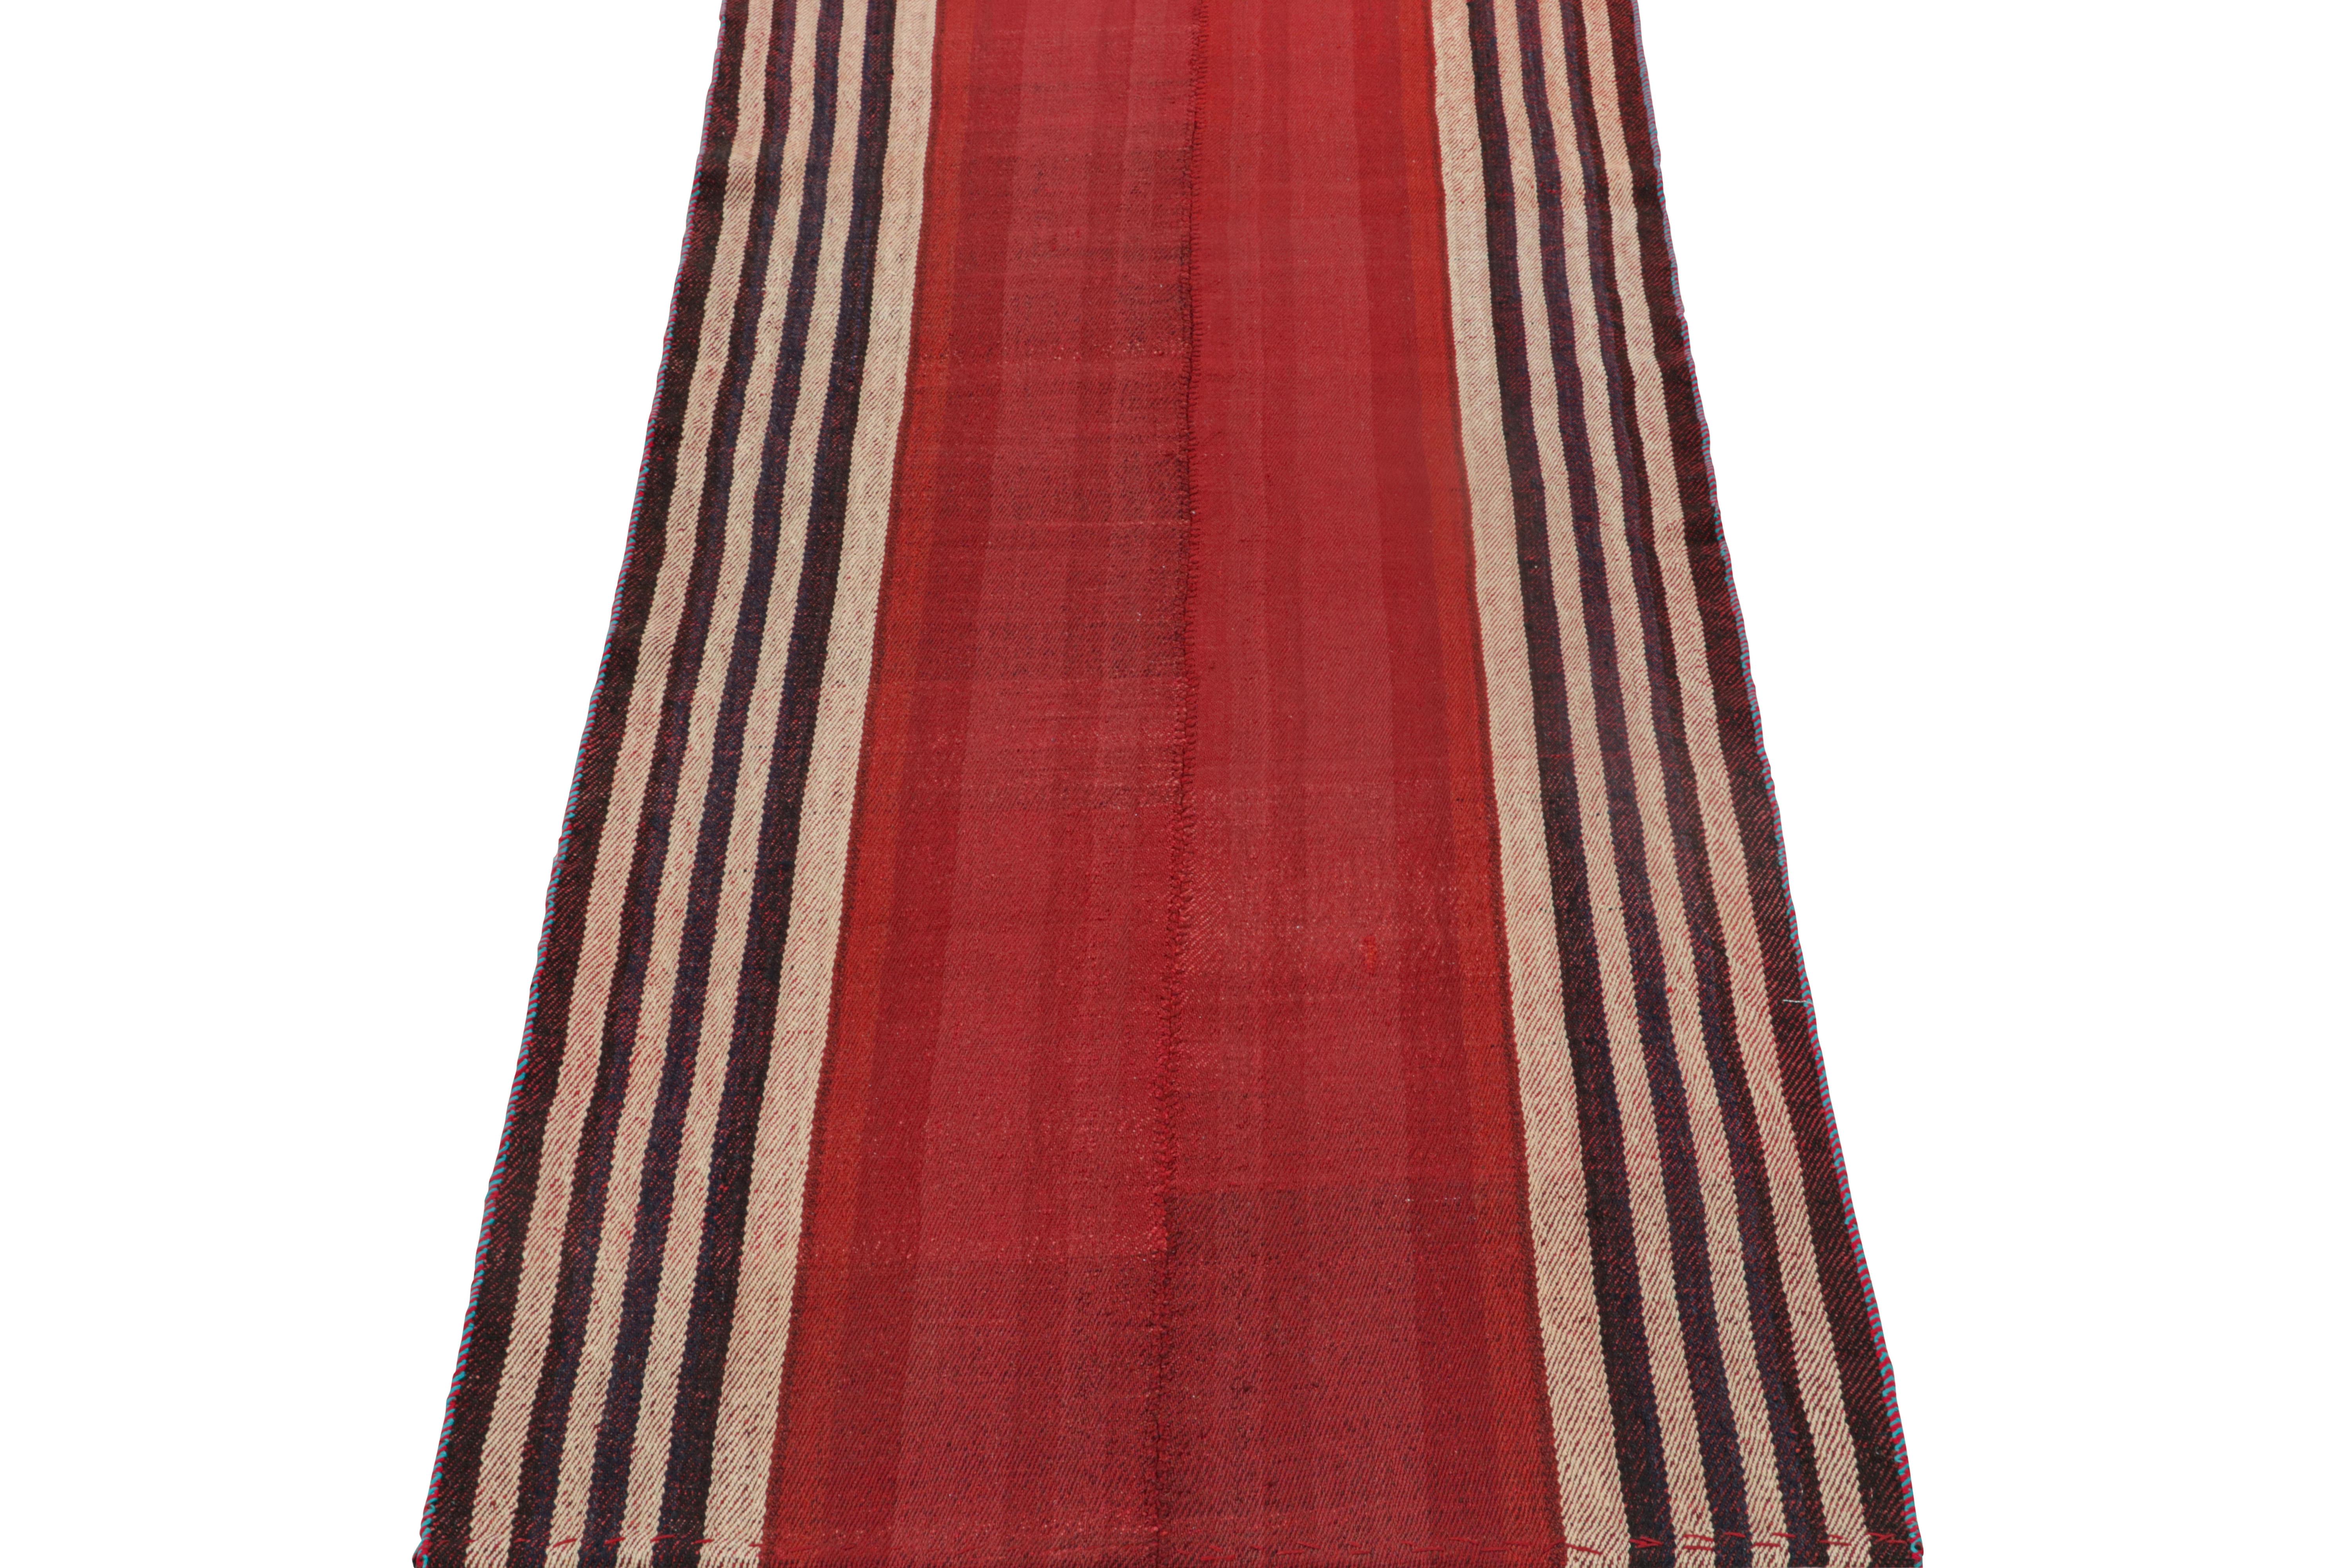 This vintage 3x7 Persian Kilim is a midcentury tribal runner, handwoven in wool circa 1950-1960. 

Its design most likely represents a Jajim-style Kilim–a flat-weaving technique in which multiple pieces are combined into one. This creates the look